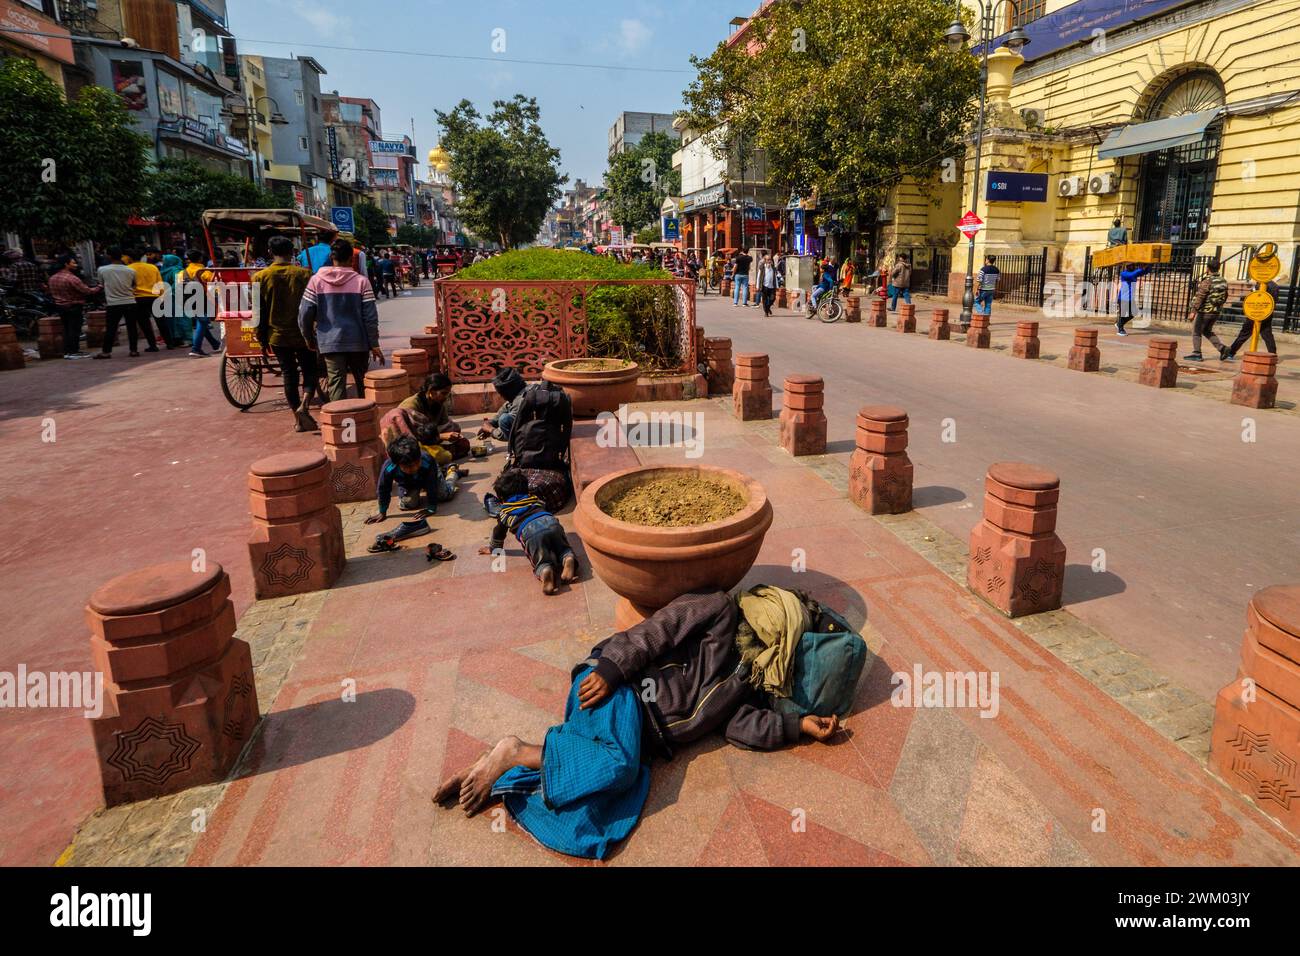 Homeless and destitute Indians sleeping on the street in Delhi Stock Photo